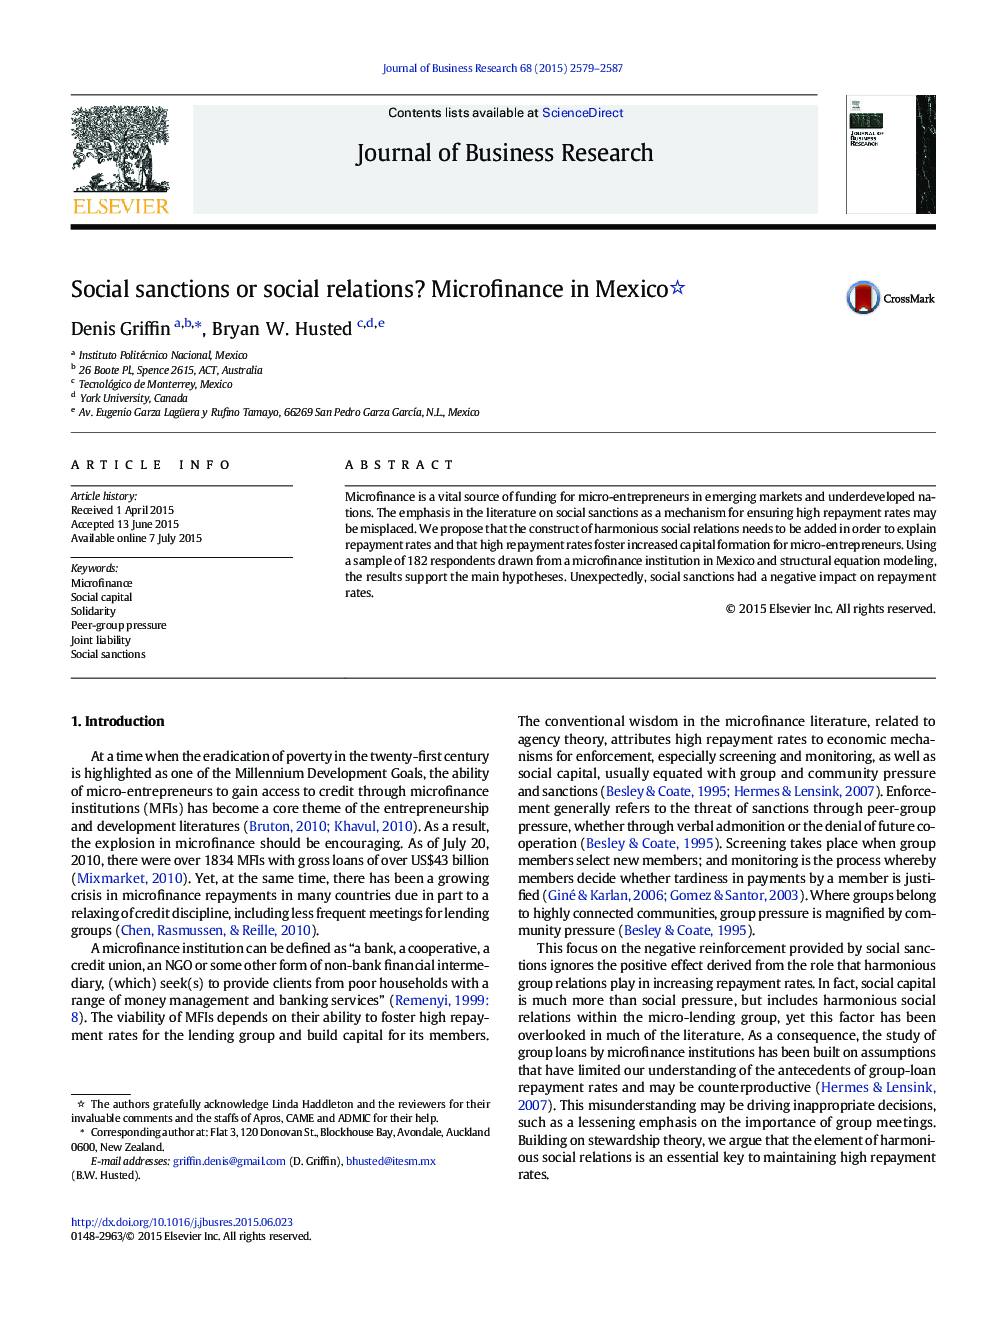 Social sanctions or social relations? Microfinance in Mexico 